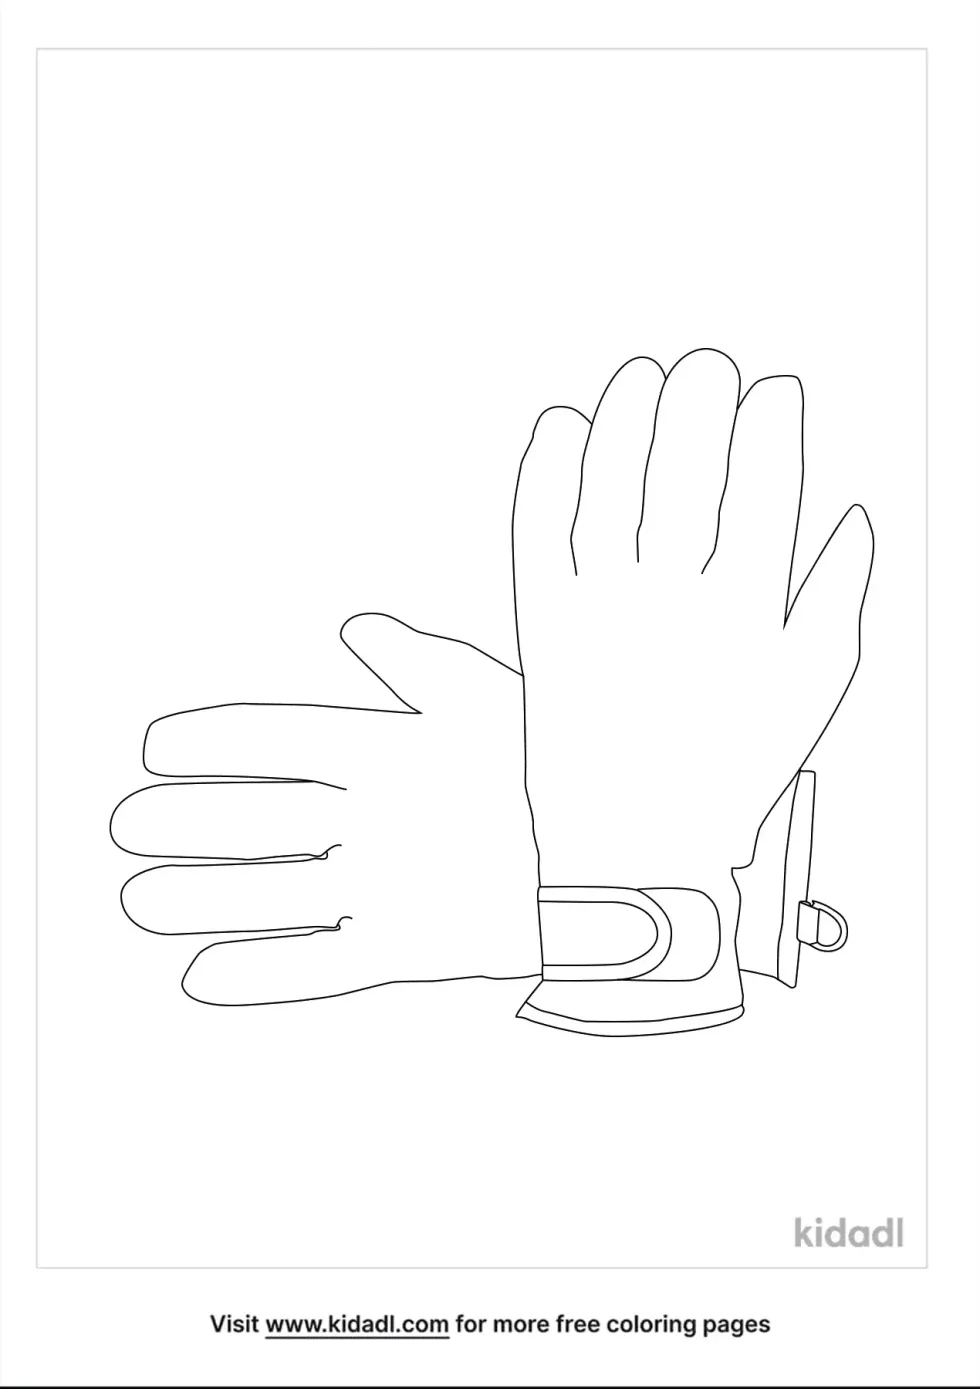 Diving Gloves Coloring Page